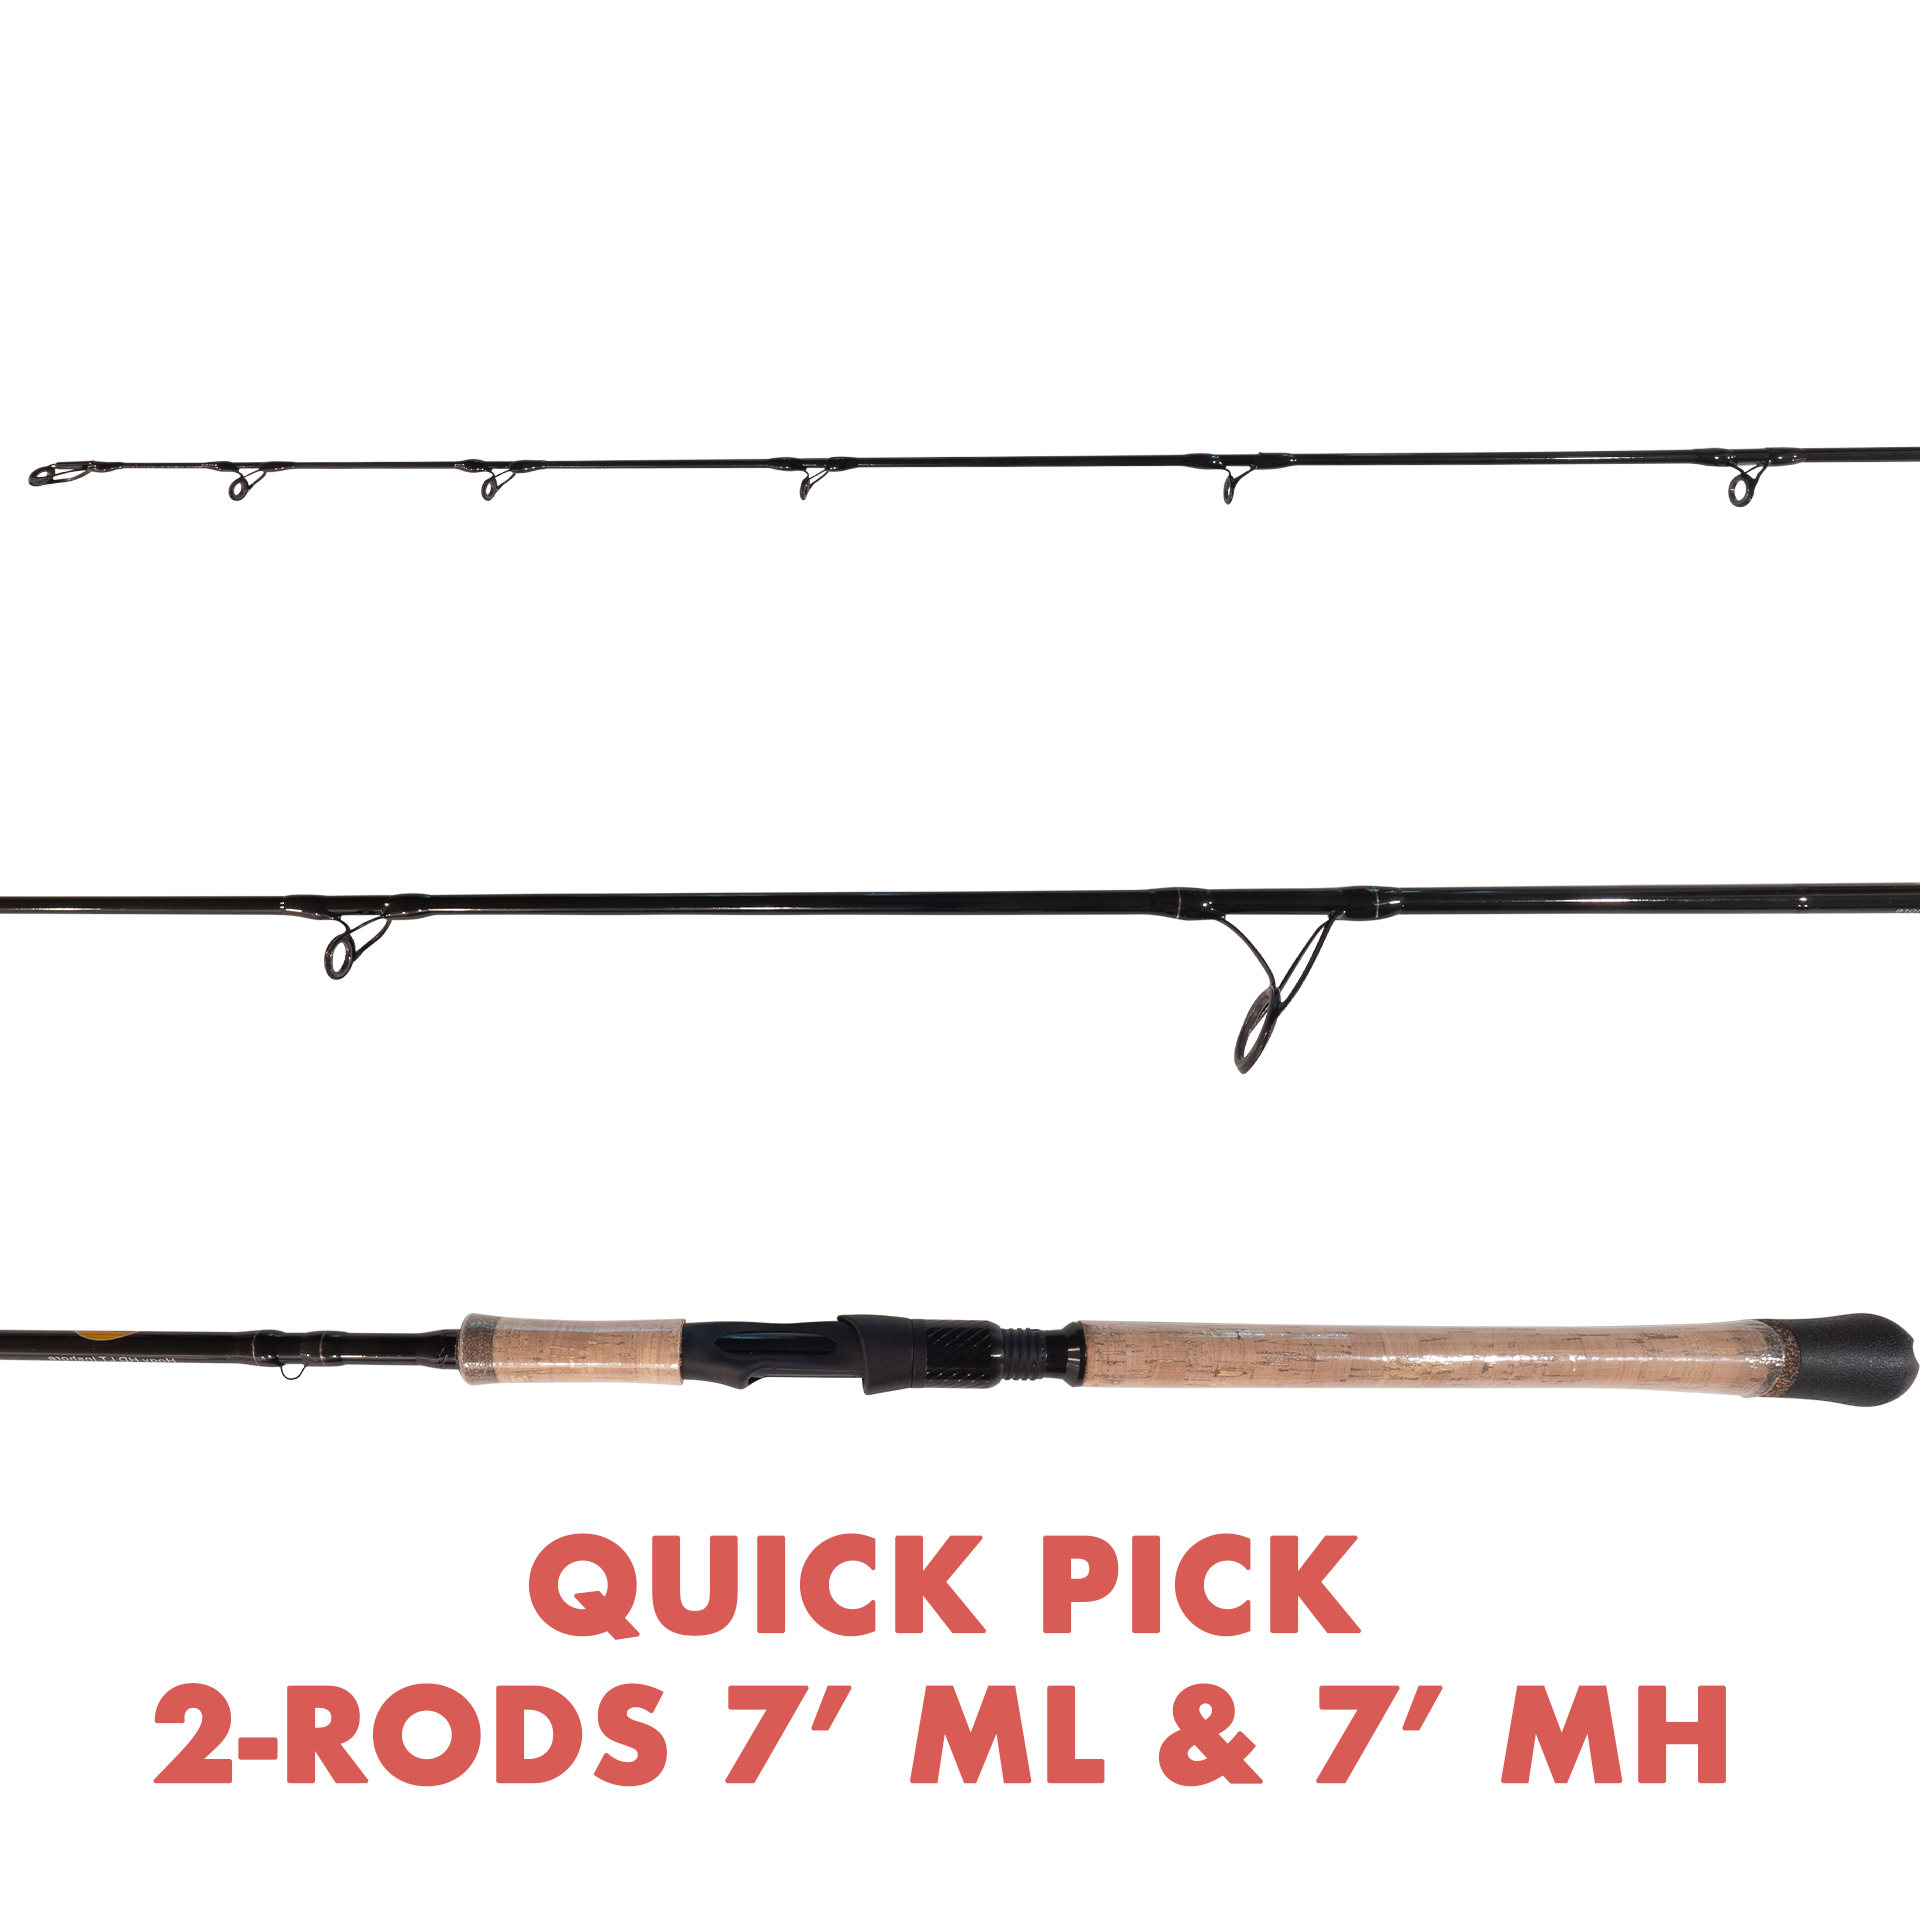 FTO Pre-Order Special: QUICK PICK Inshore Spinning Rod: 1 Each 7' ML & 7' MH (Ship Date By 5/15)